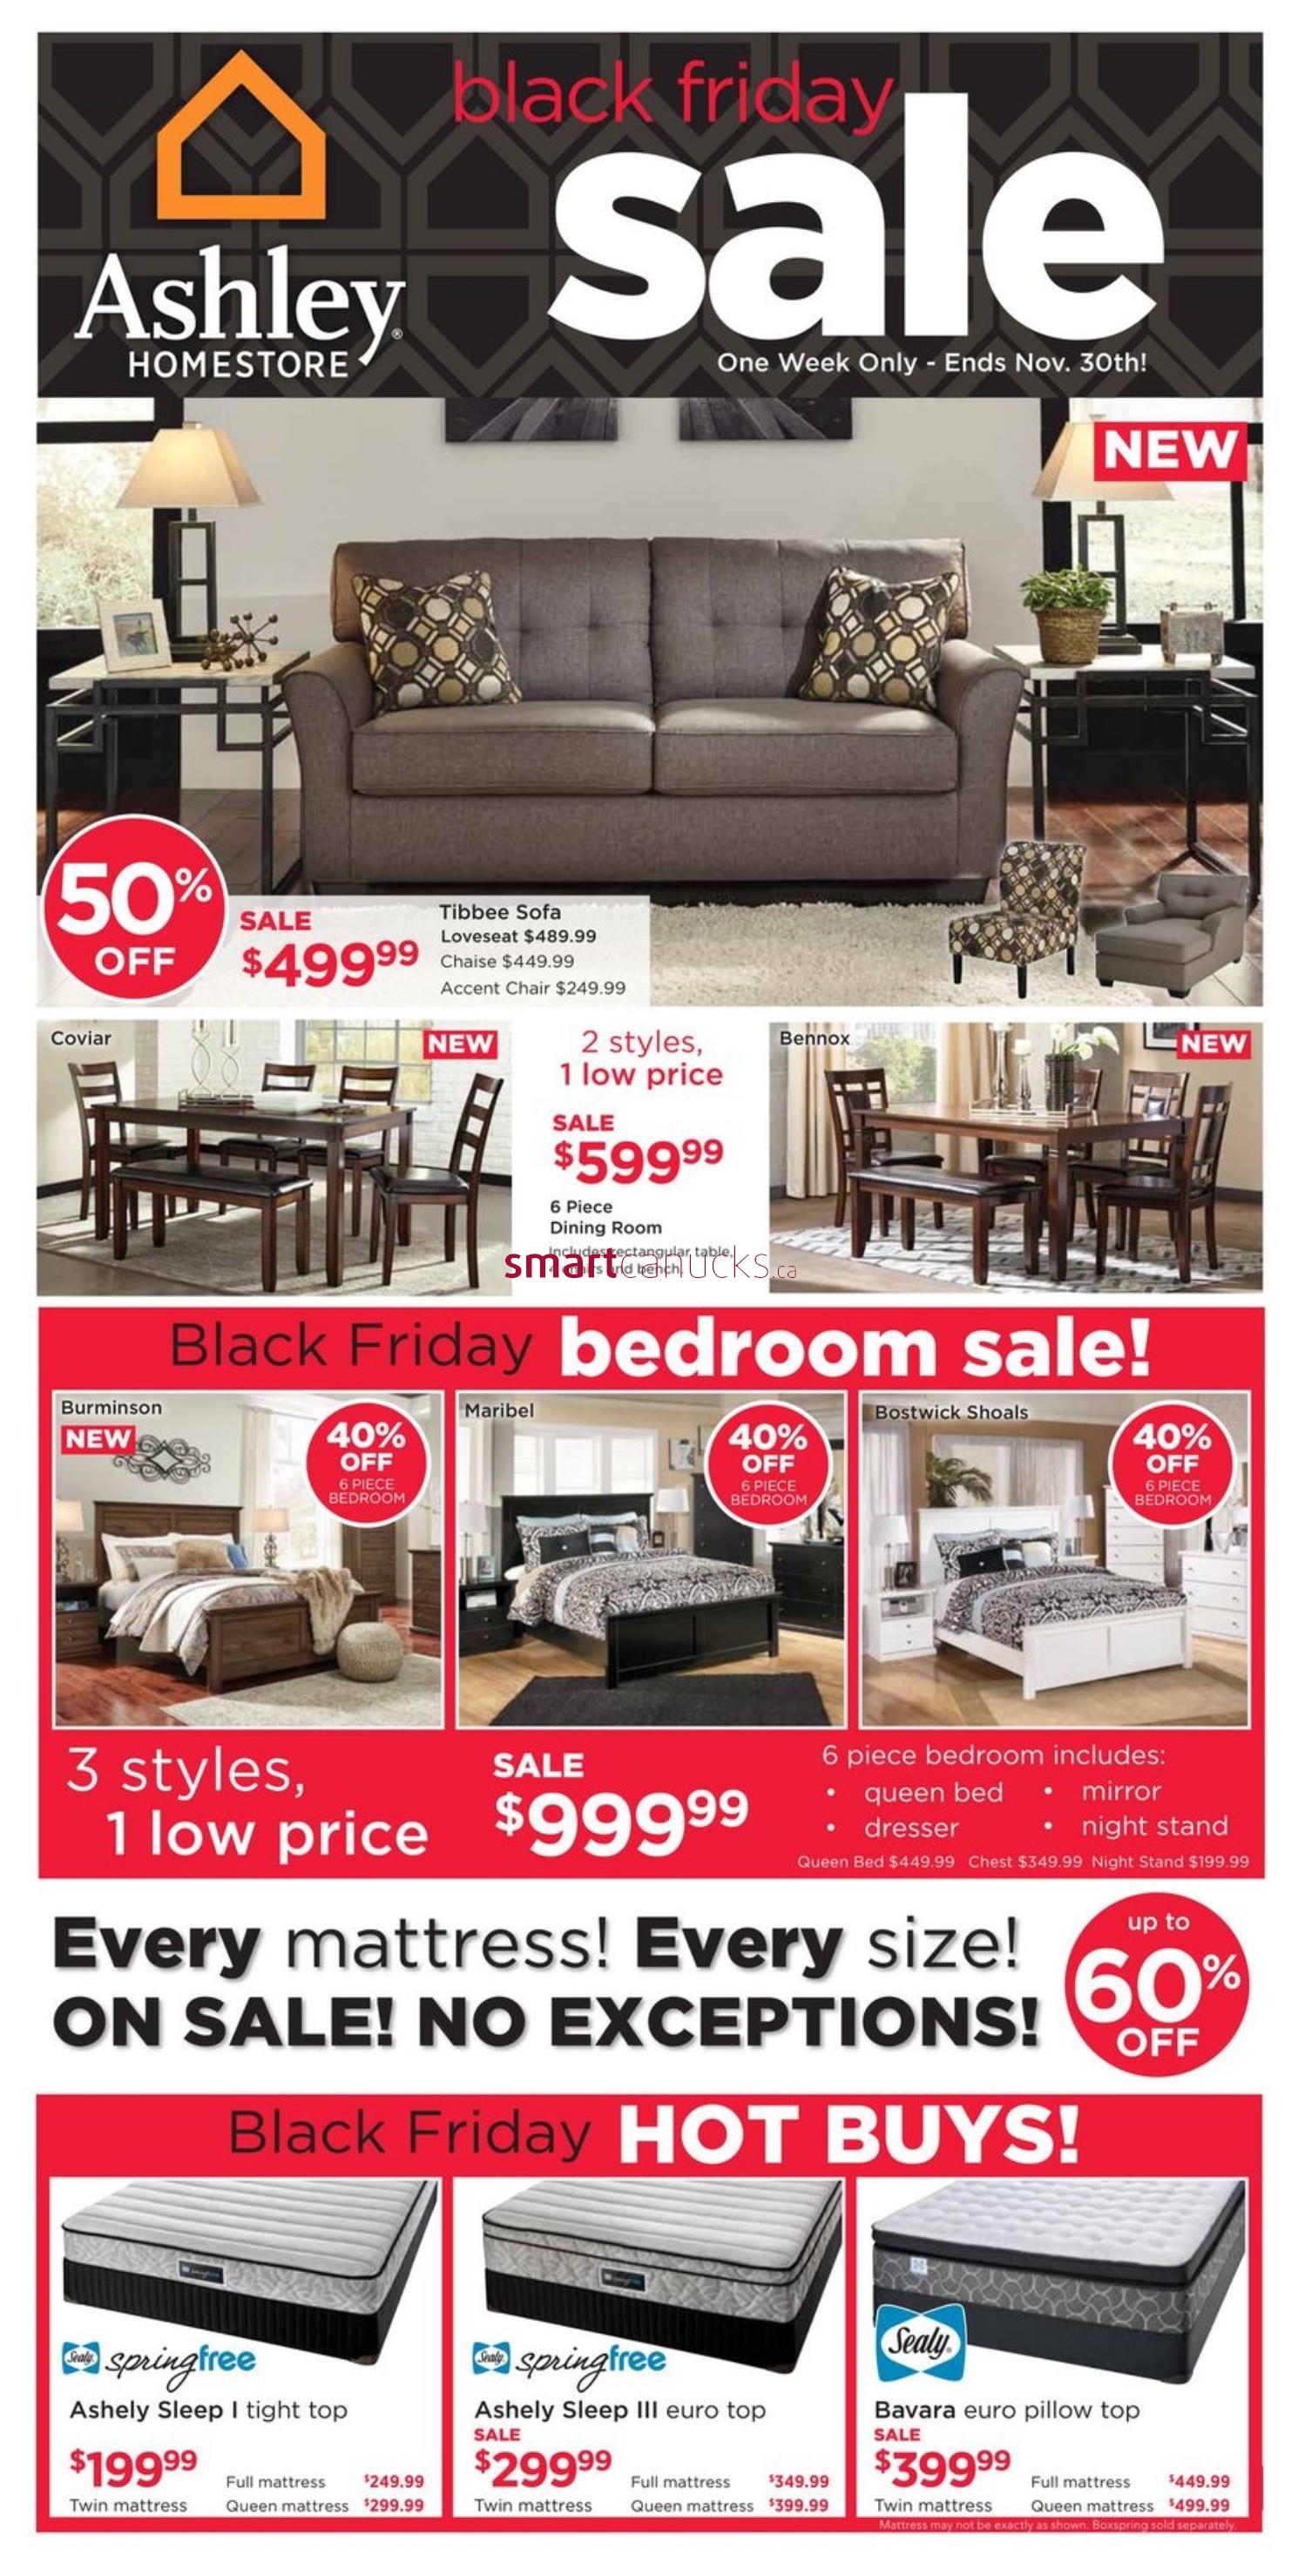 Black Friday Deals 2018 Ashley Furniture Every Door Direct